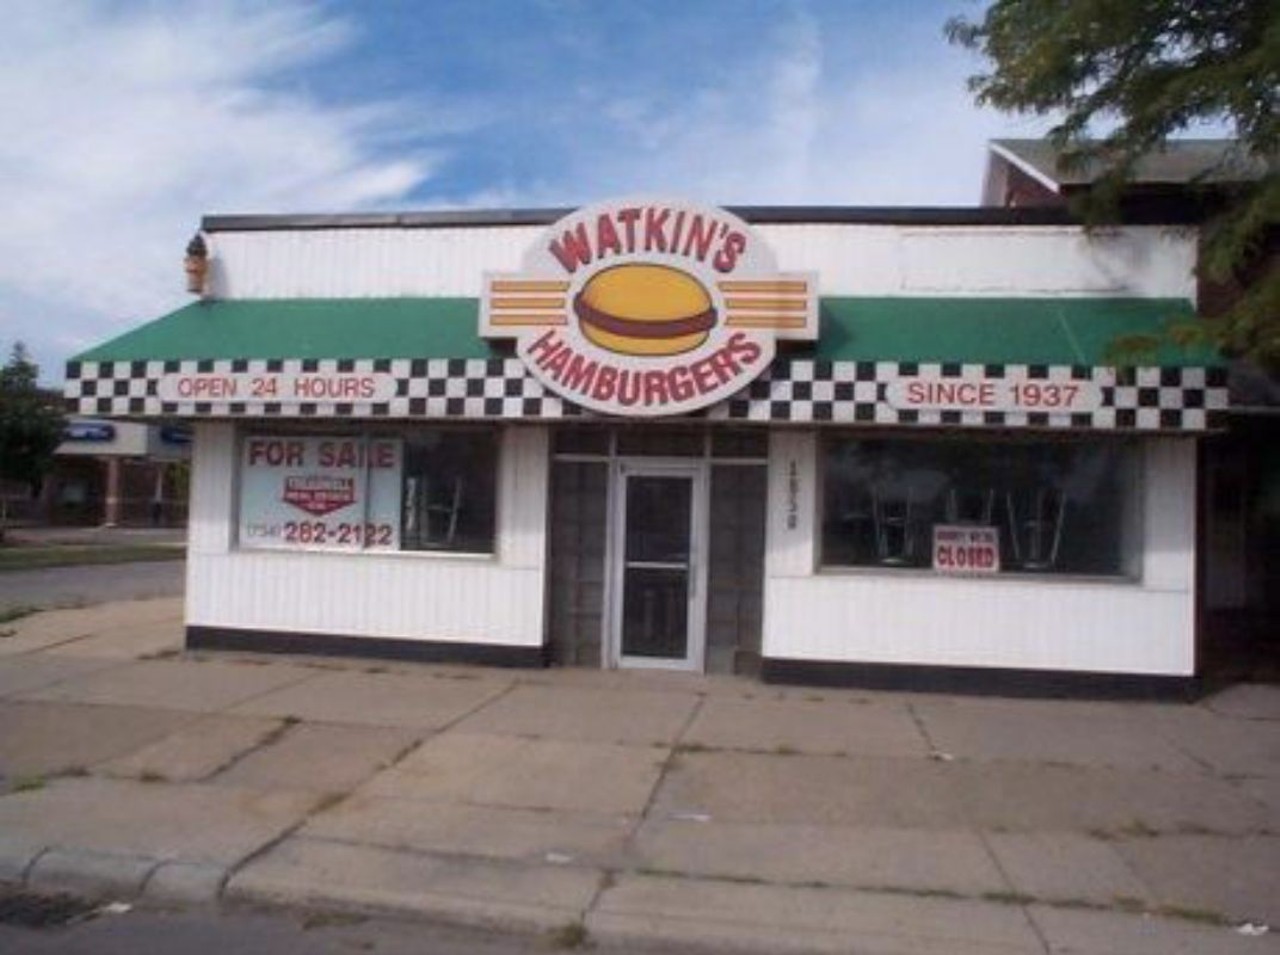 Watkins Burgers
The classic Downriver burger joint opened in 1937 but met its demise in the early 2000s. But Wyandotte bars still have what they call  &#147;Watkins night&#147; which we&#146;re told is basically burger night. 
Photo via, The News Herald  